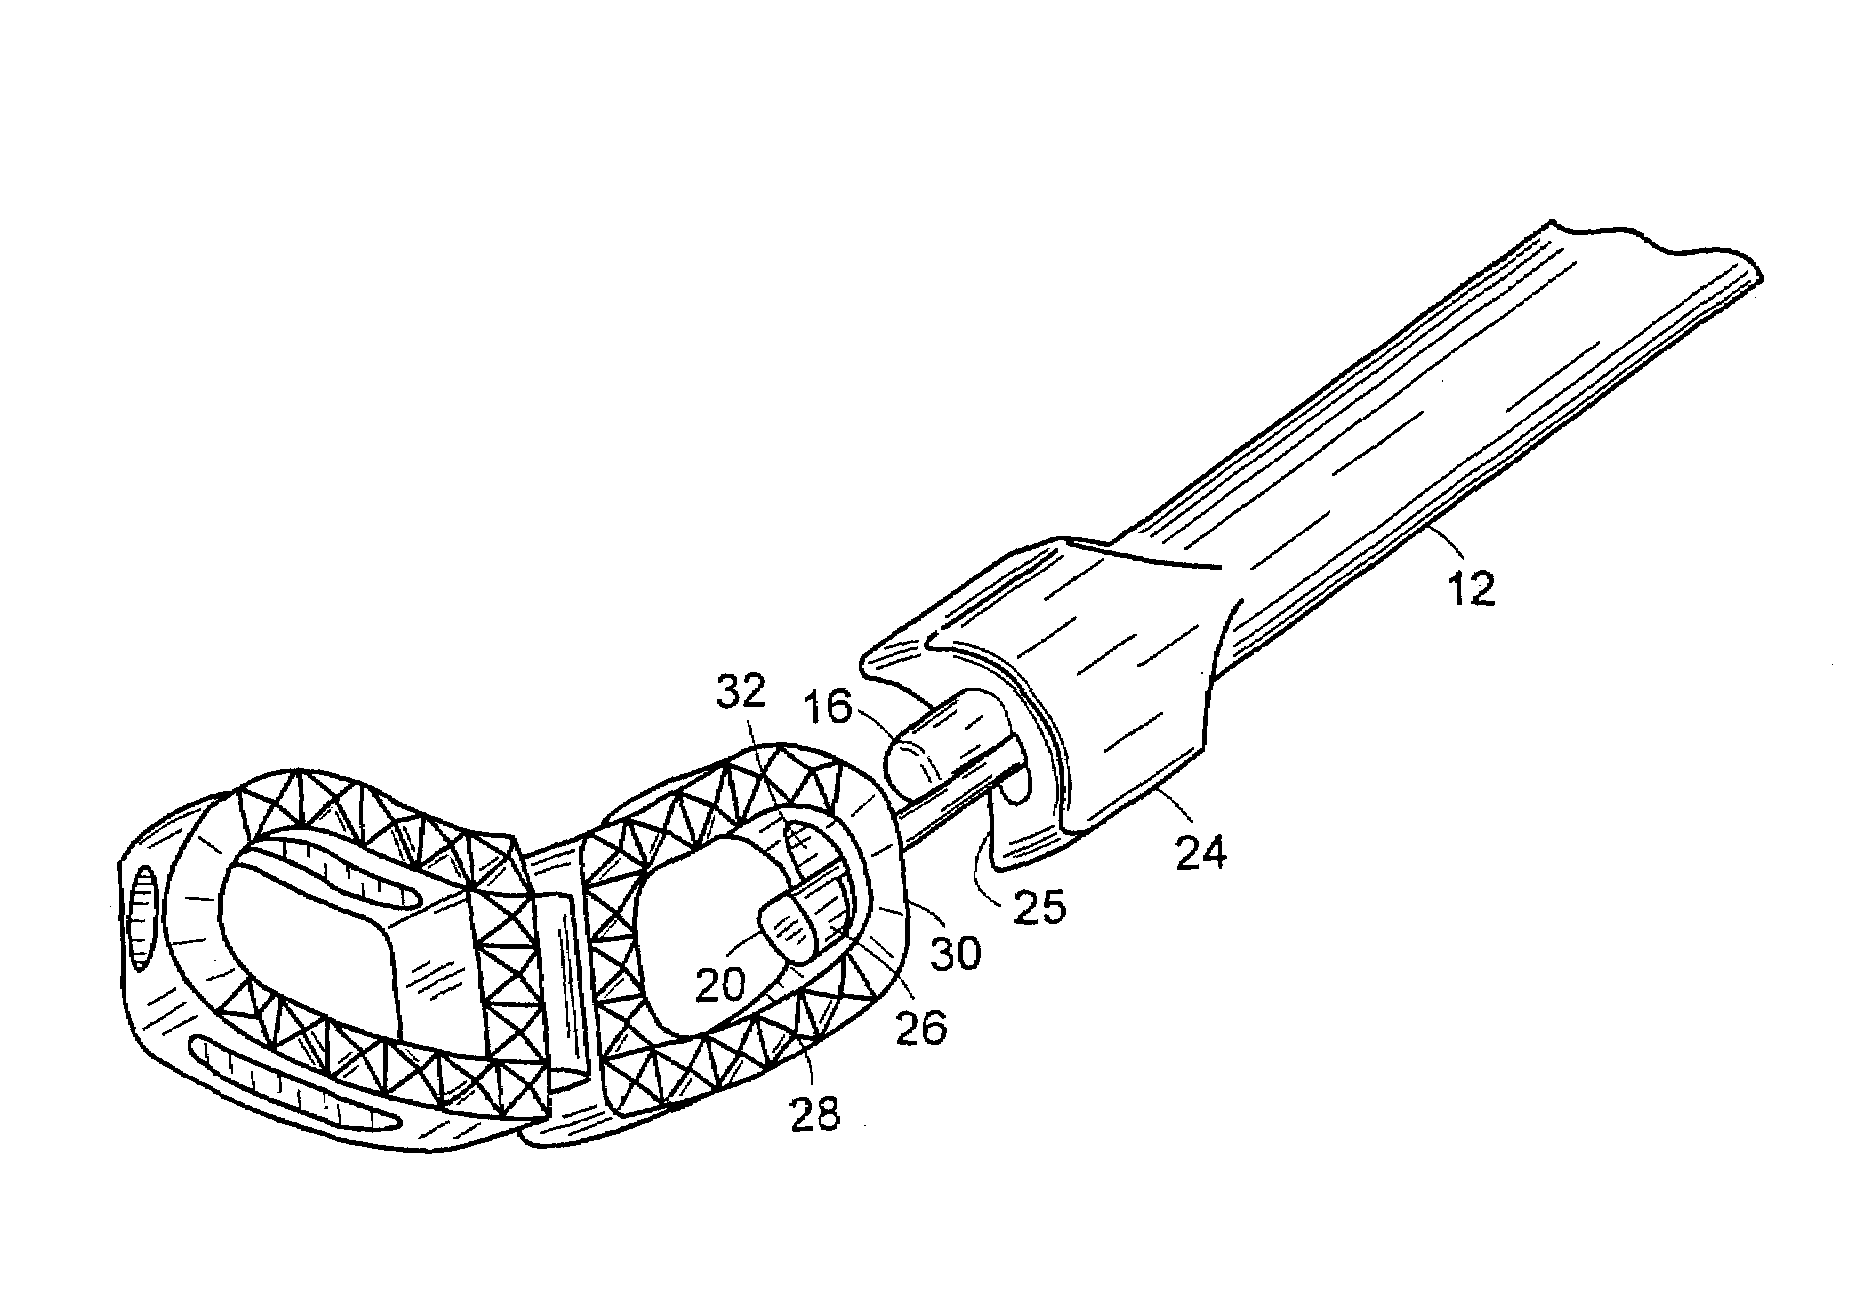 Device for insertion of implants